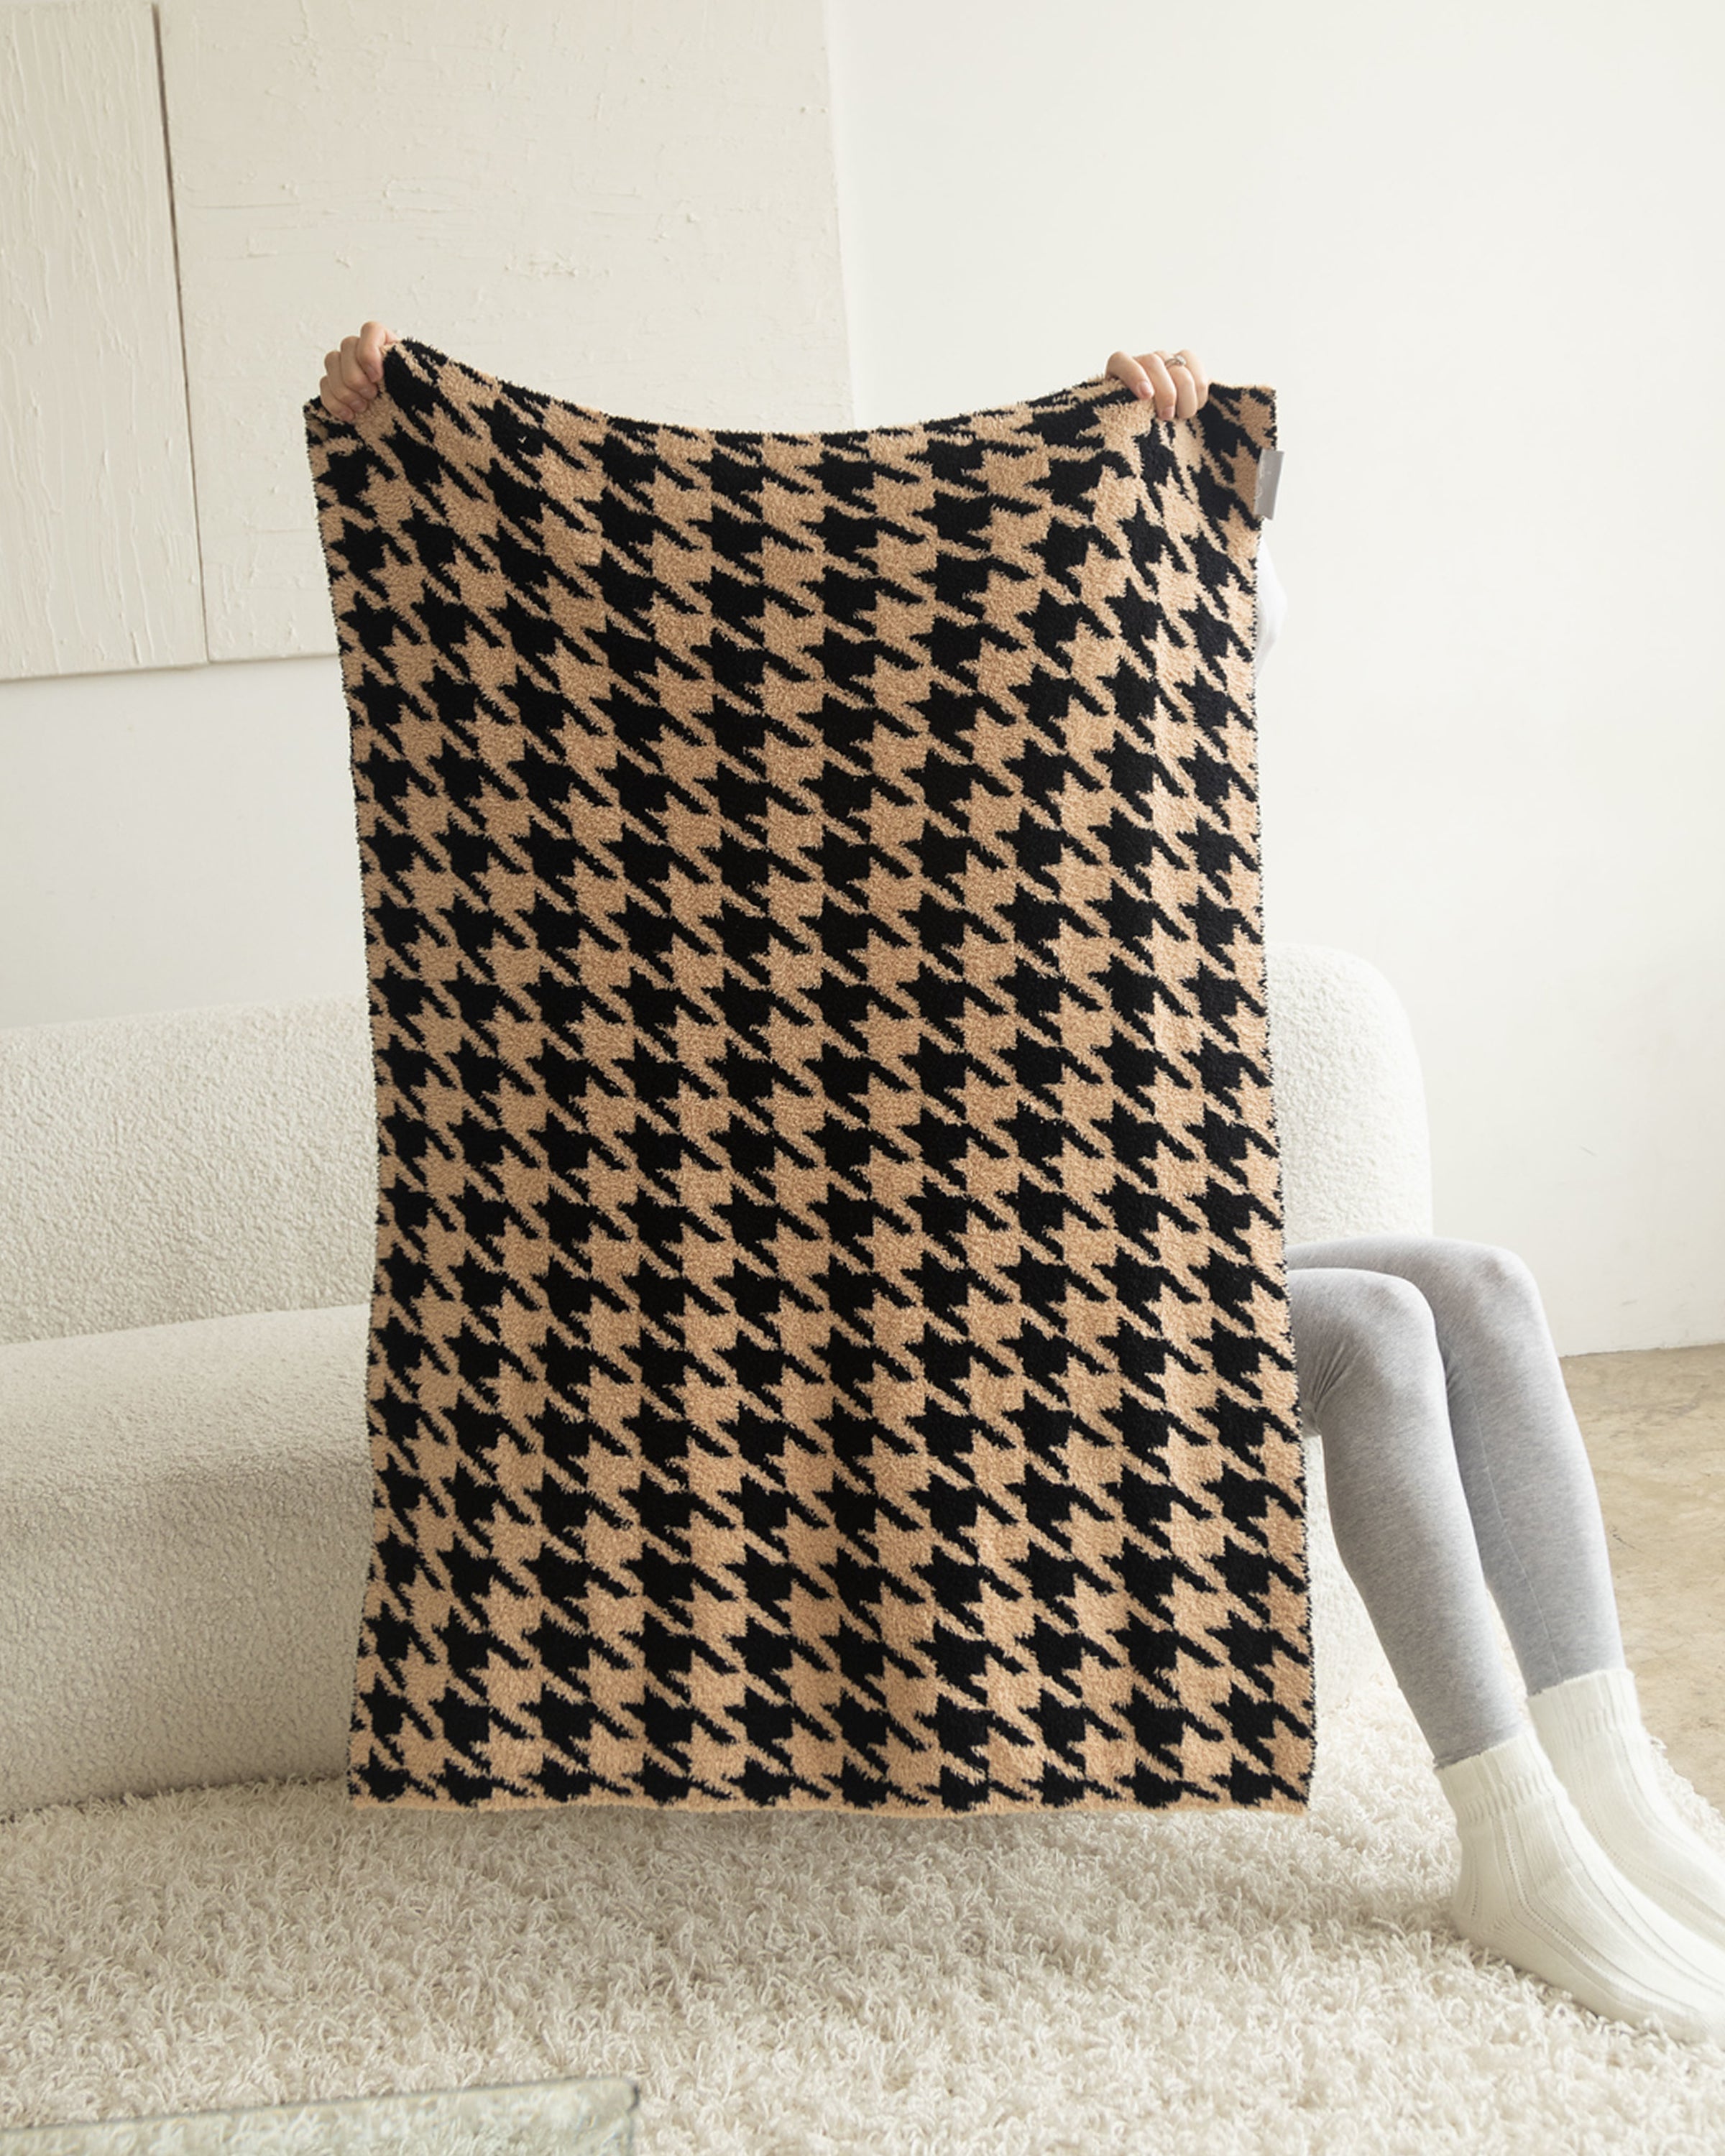 Tolone Houndstooth Polychrome Small Blanket